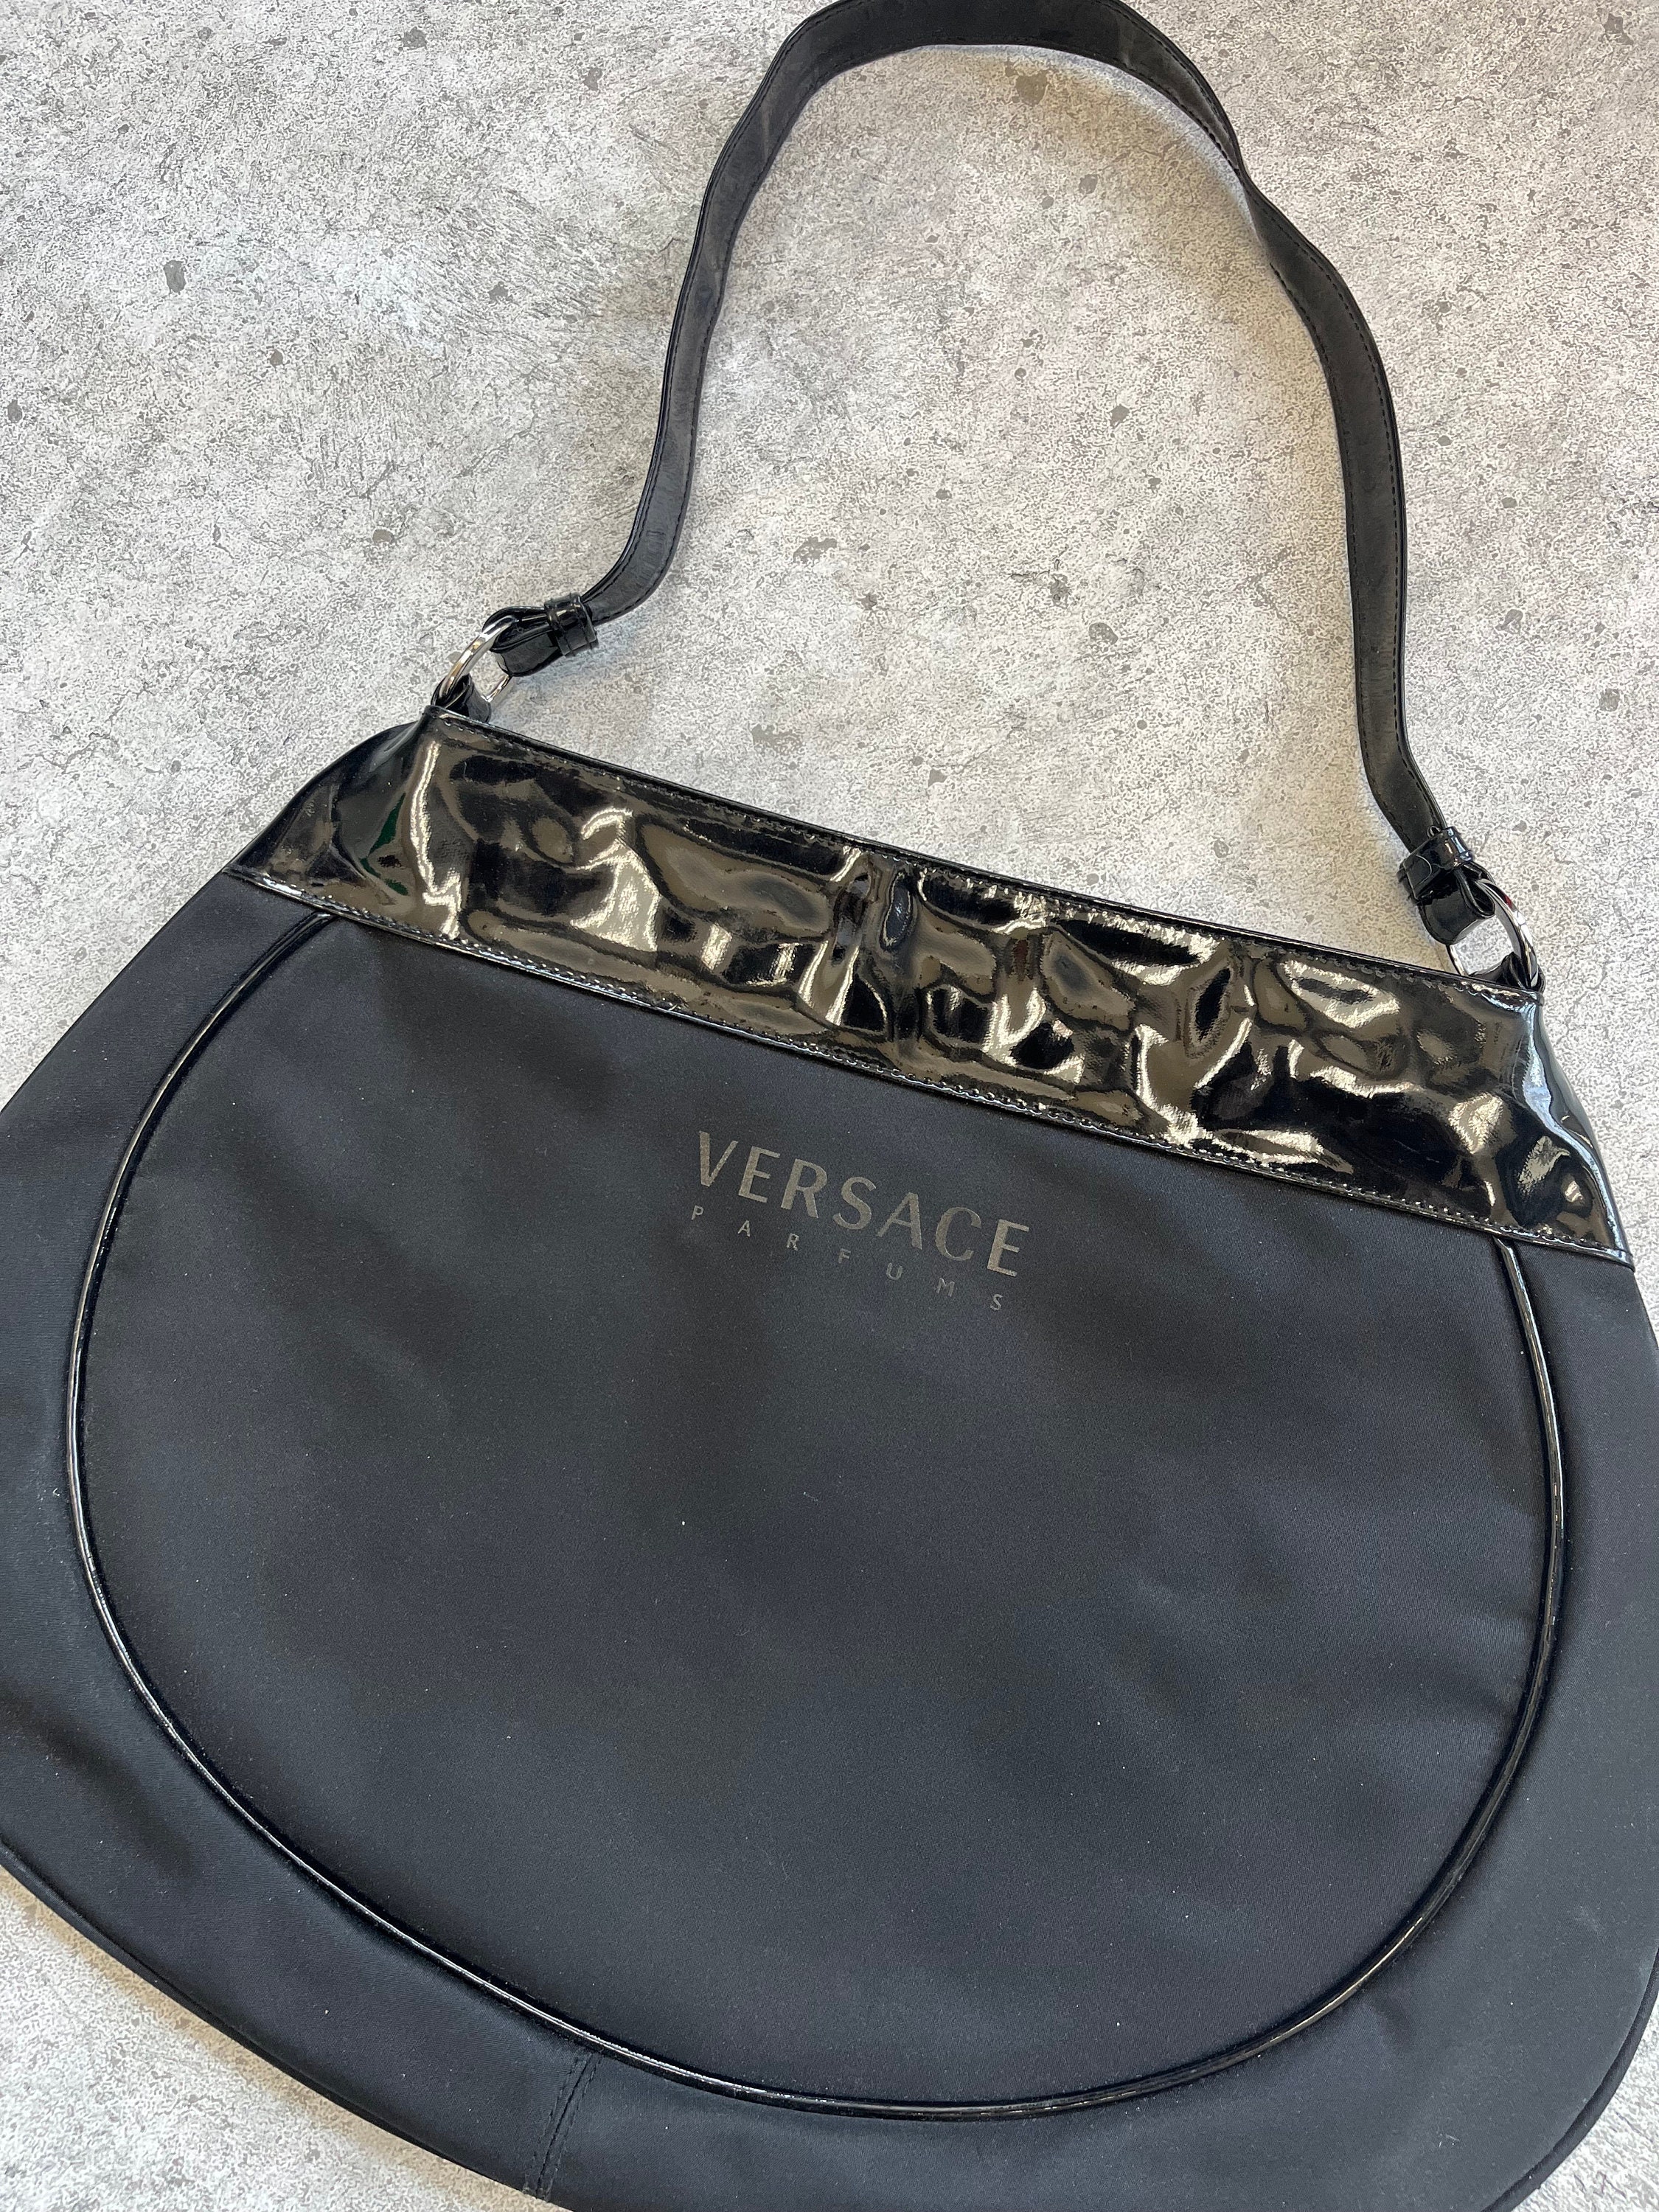 Rare Vintage 90's GIANNI VERSACE Bag at Rice and Beans Vintage